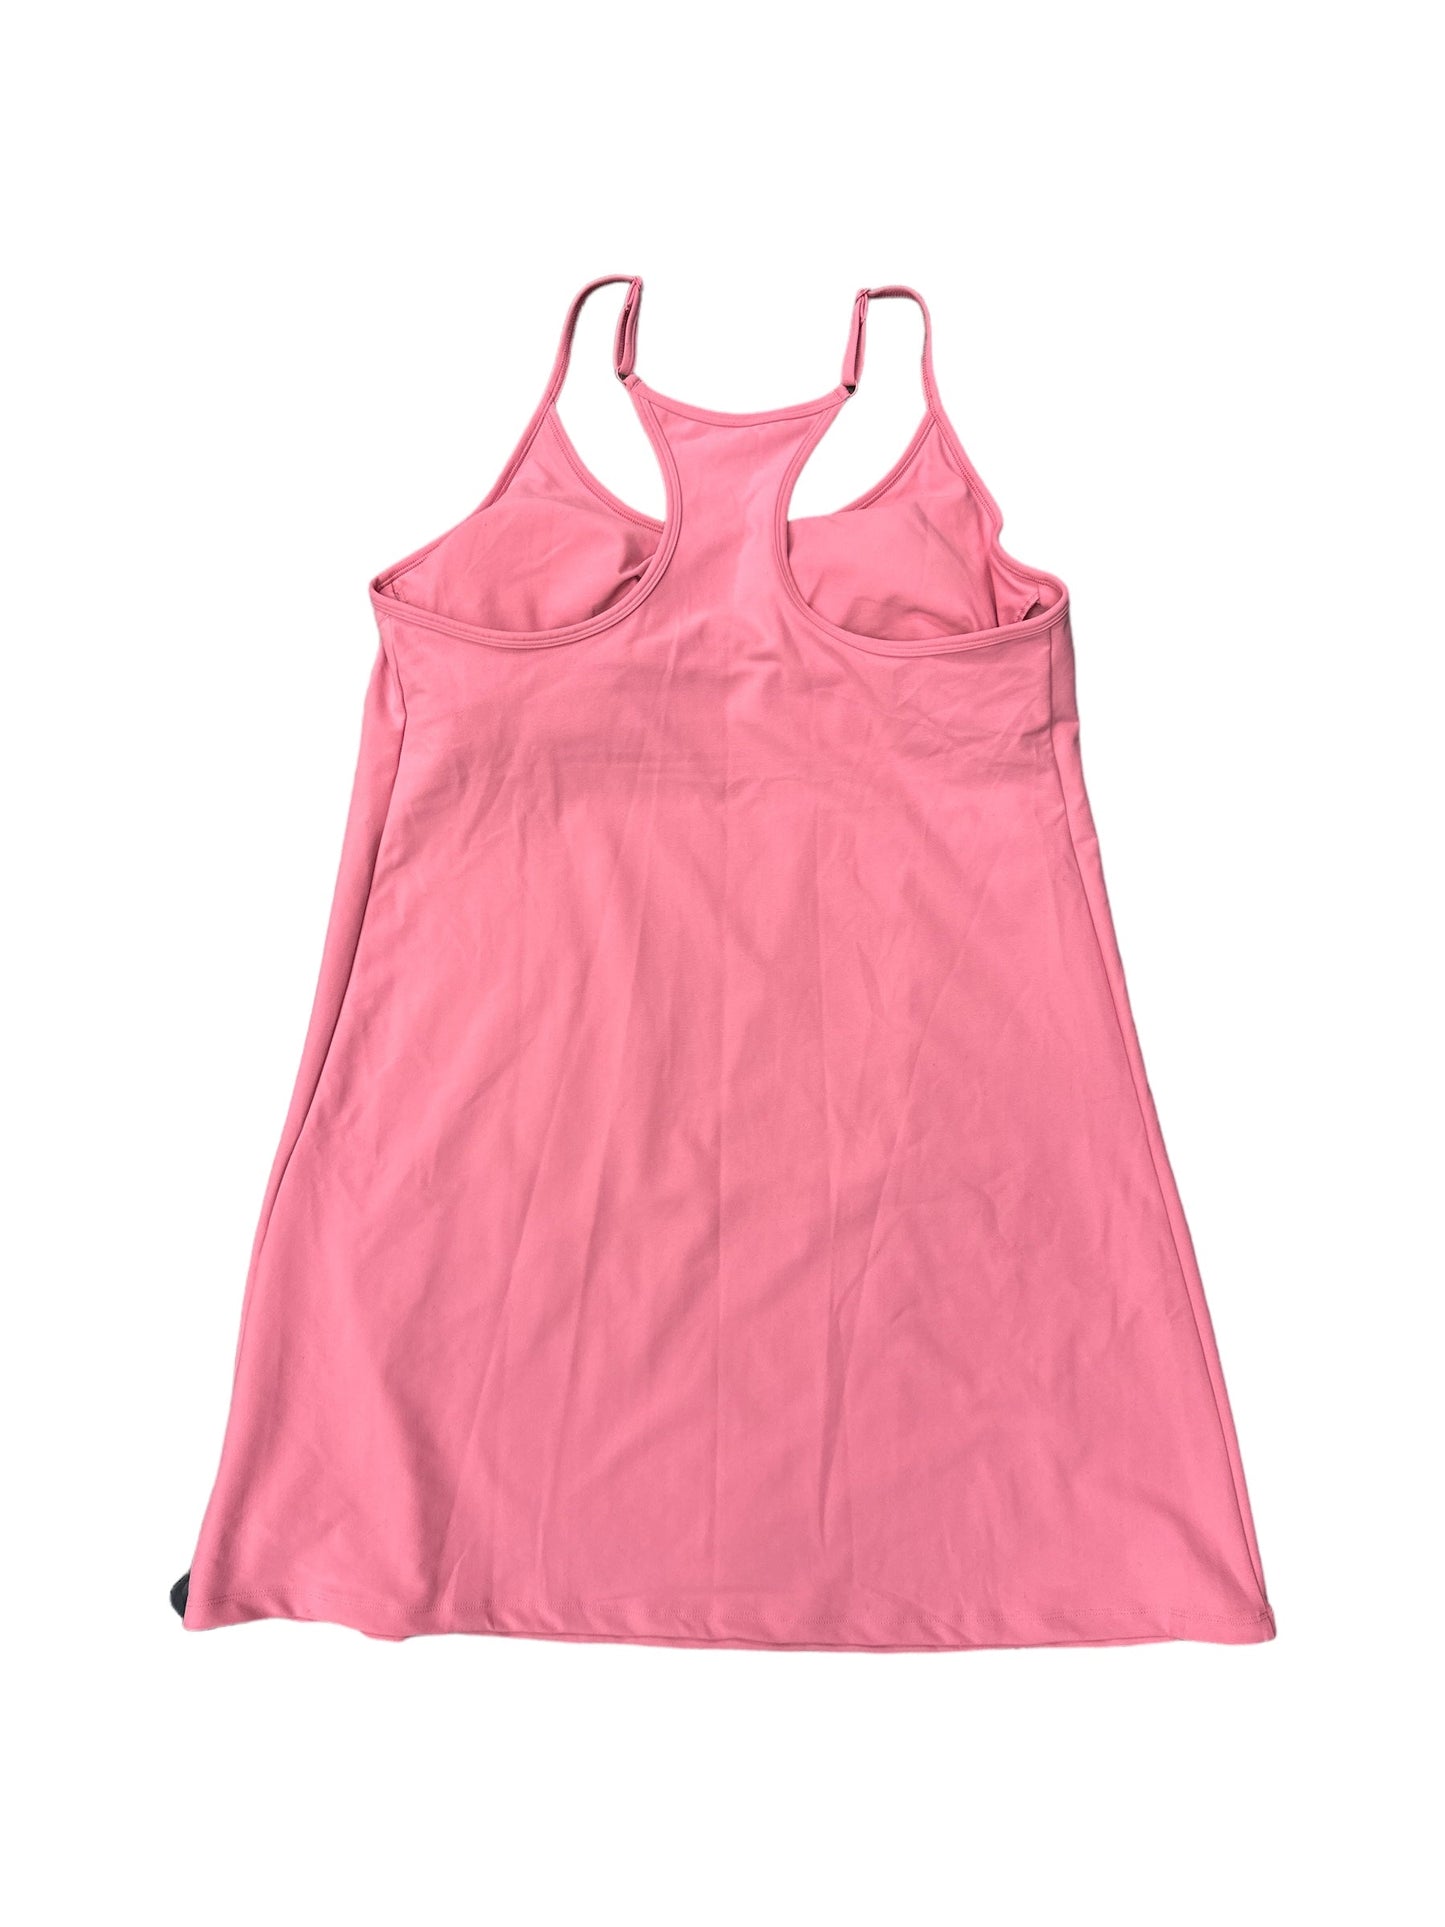 Pink Athletic Dress Old Navy, Size Xl